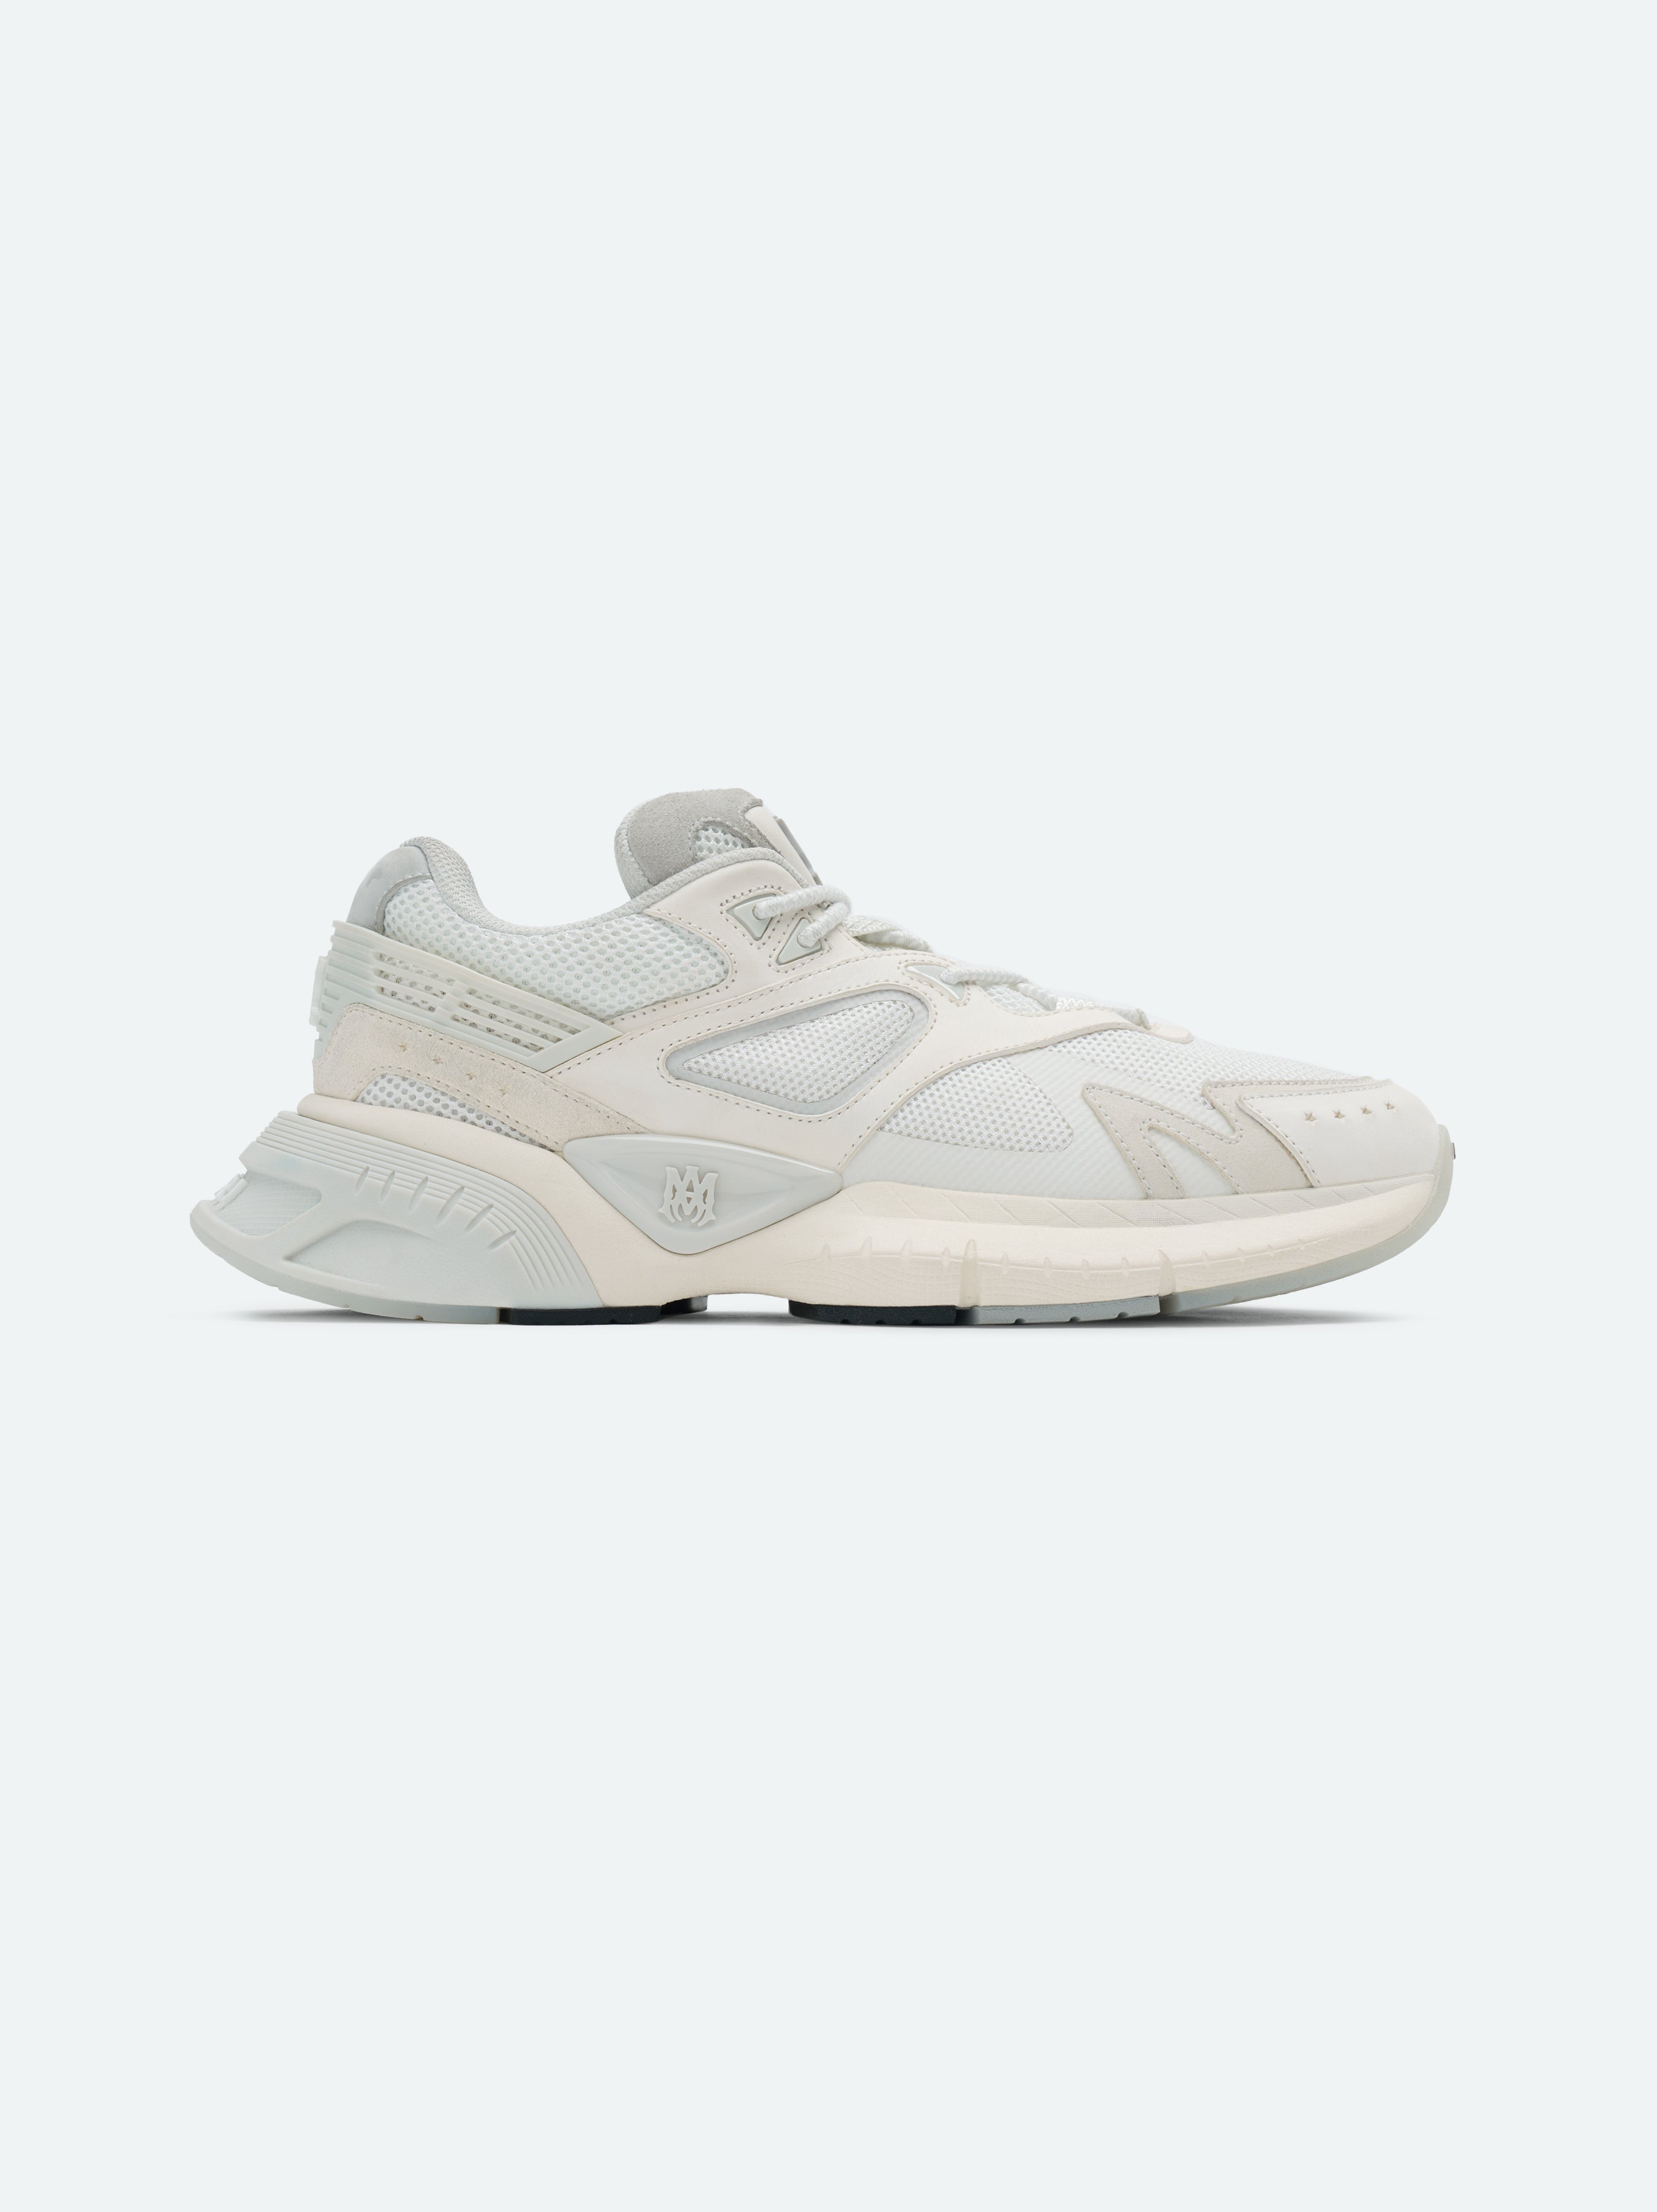 Product WOMEN - WOMEN'S MA RUNNER - White featured image